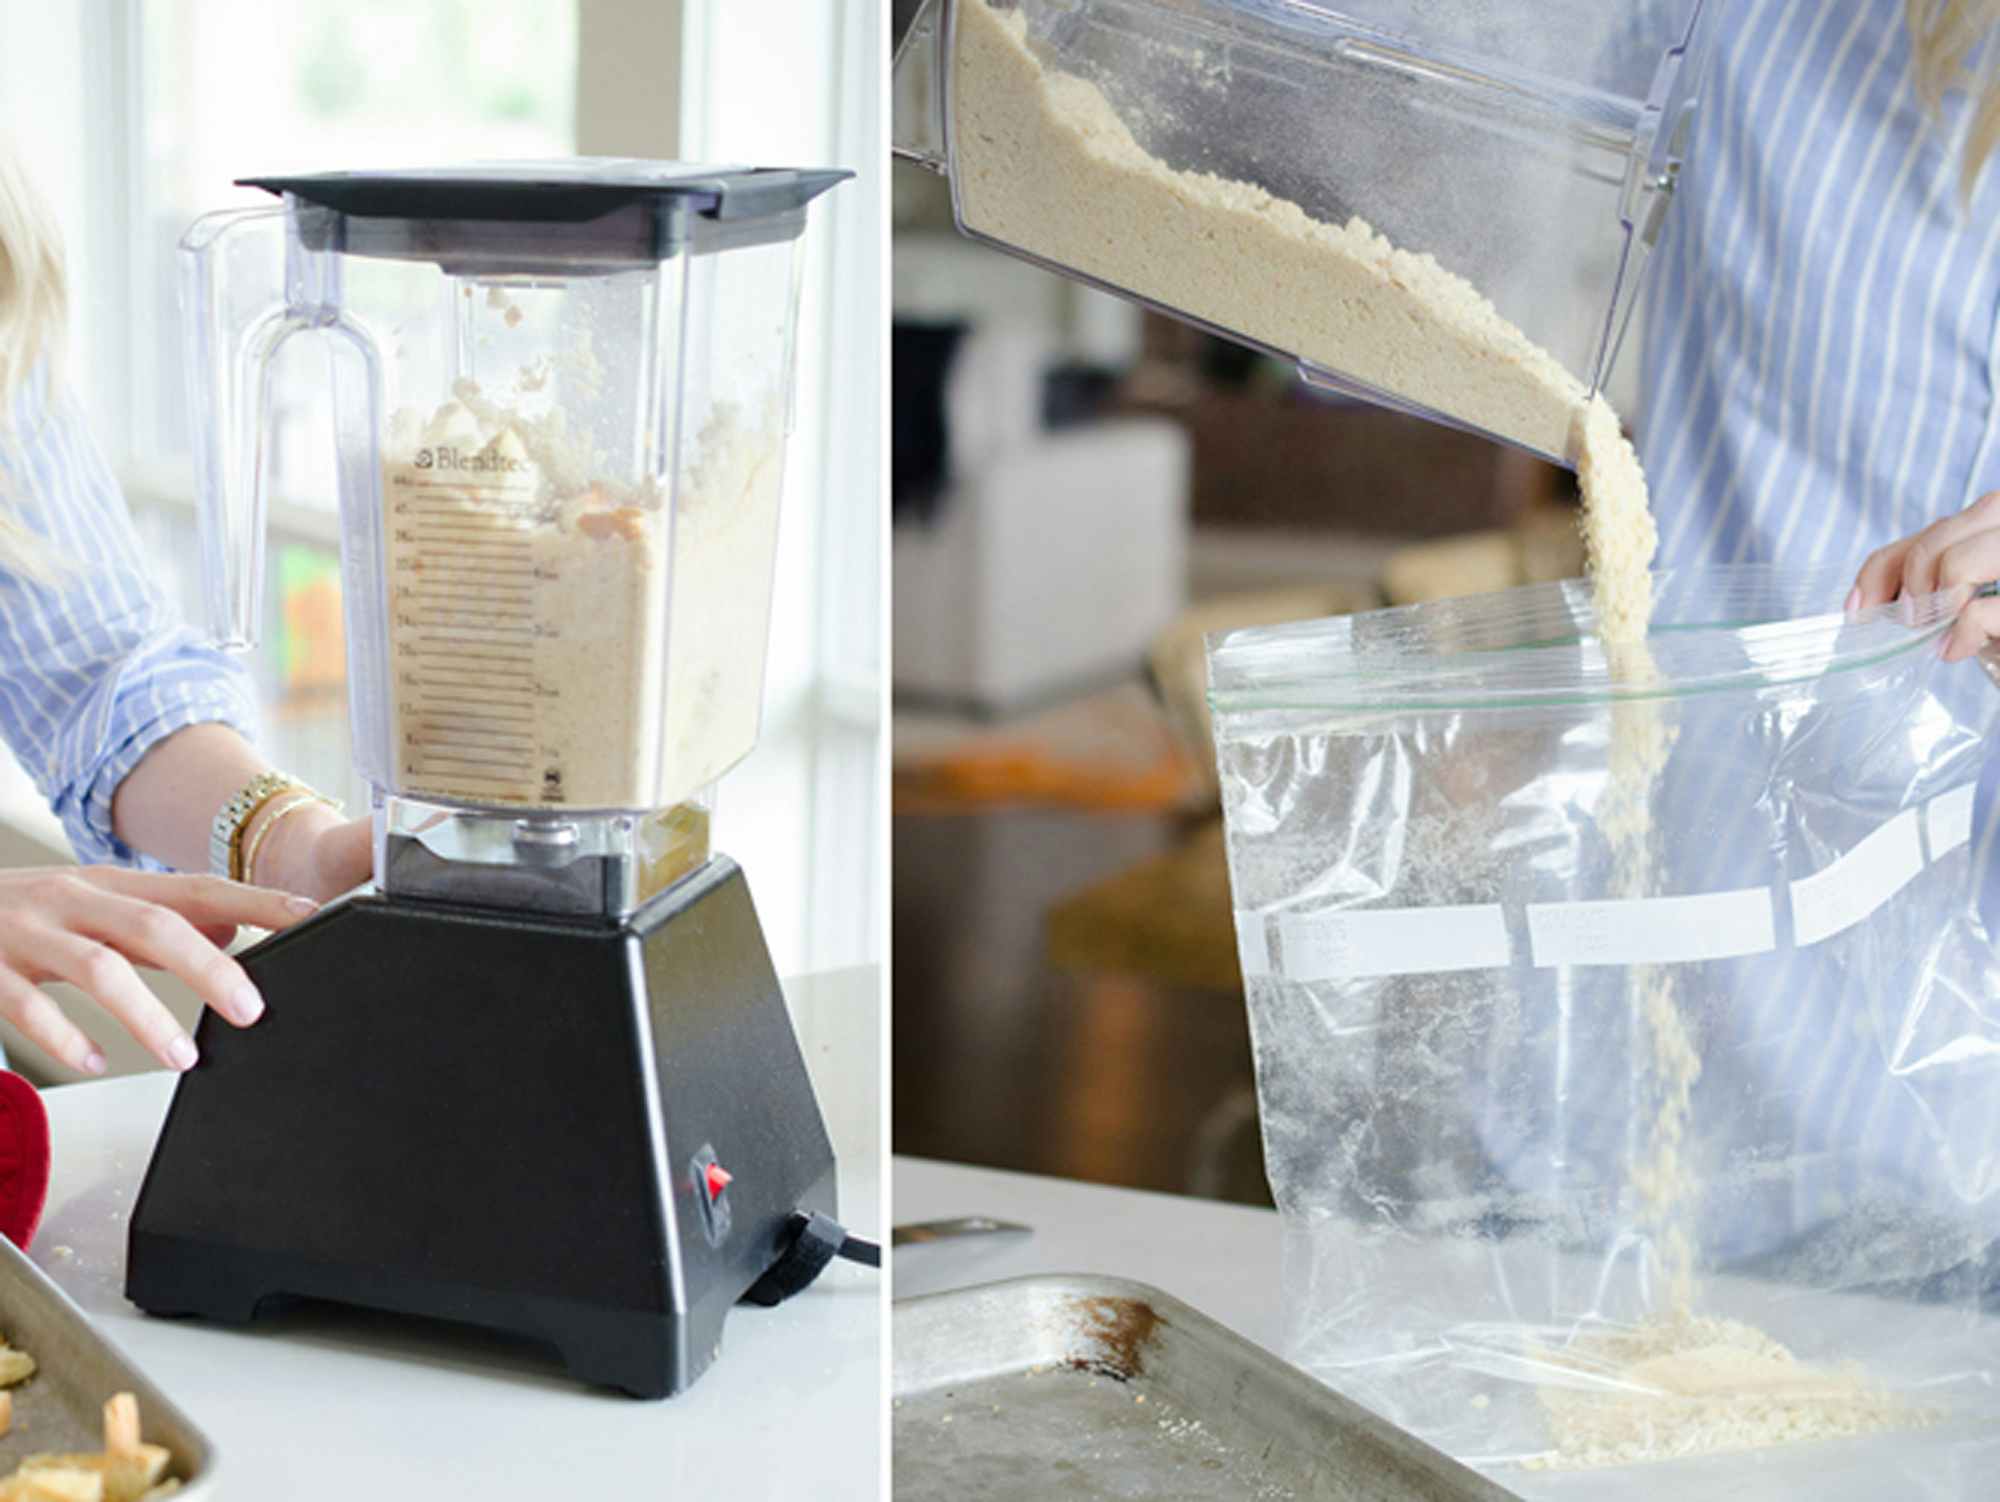 a person putting breadcrumbs into a blender